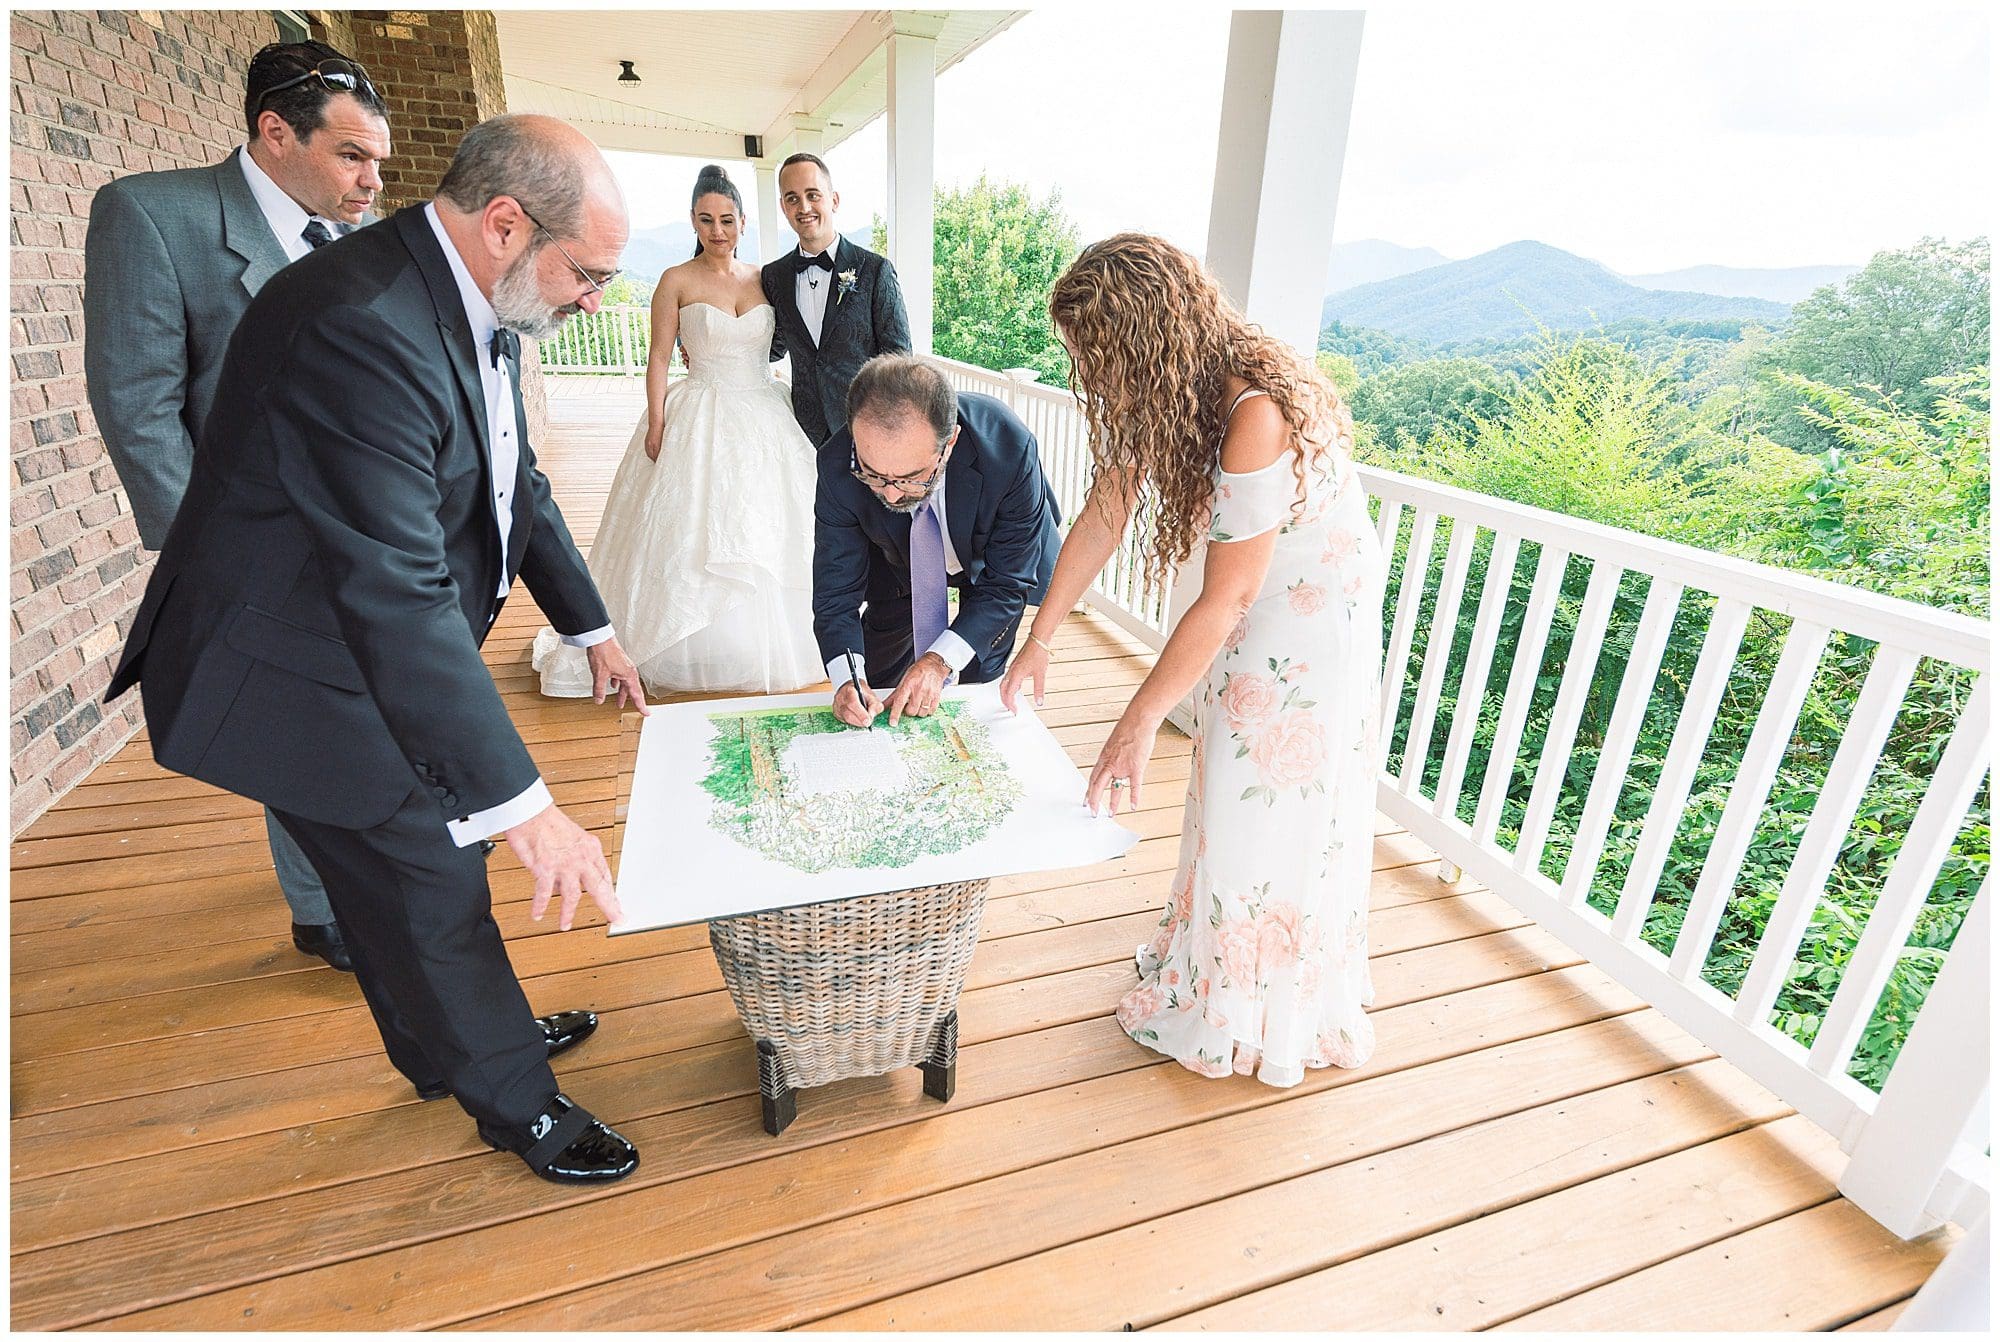 Signing the Ketubah before the wedding ceremony